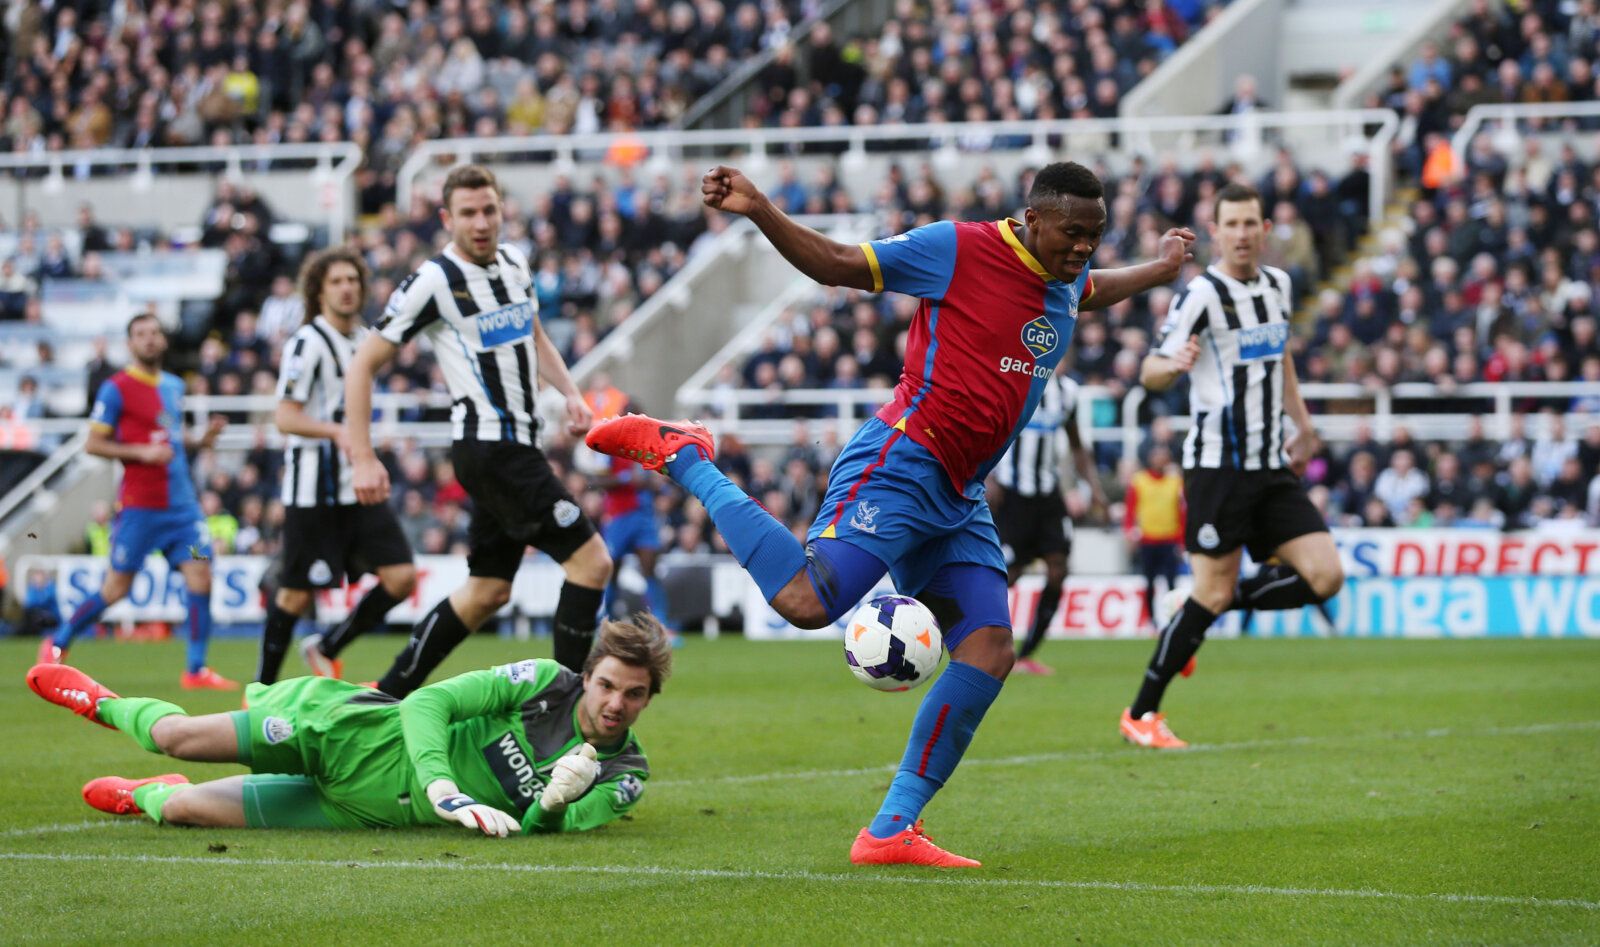 Football - Newcastle United v Crystal Palace - Barclays Premier League - St James' Park - 22/3/14 
Newcastle's Tim Krul saves from Crystal Palace's  
Kagisho Dikgacoi 
Mandatory Credit: Action Images / Lee Smith 
Livepic 
EDITORIAL USE ONLY. No use with unauthorized audio, video, data, fixture lists, club/league logos or 